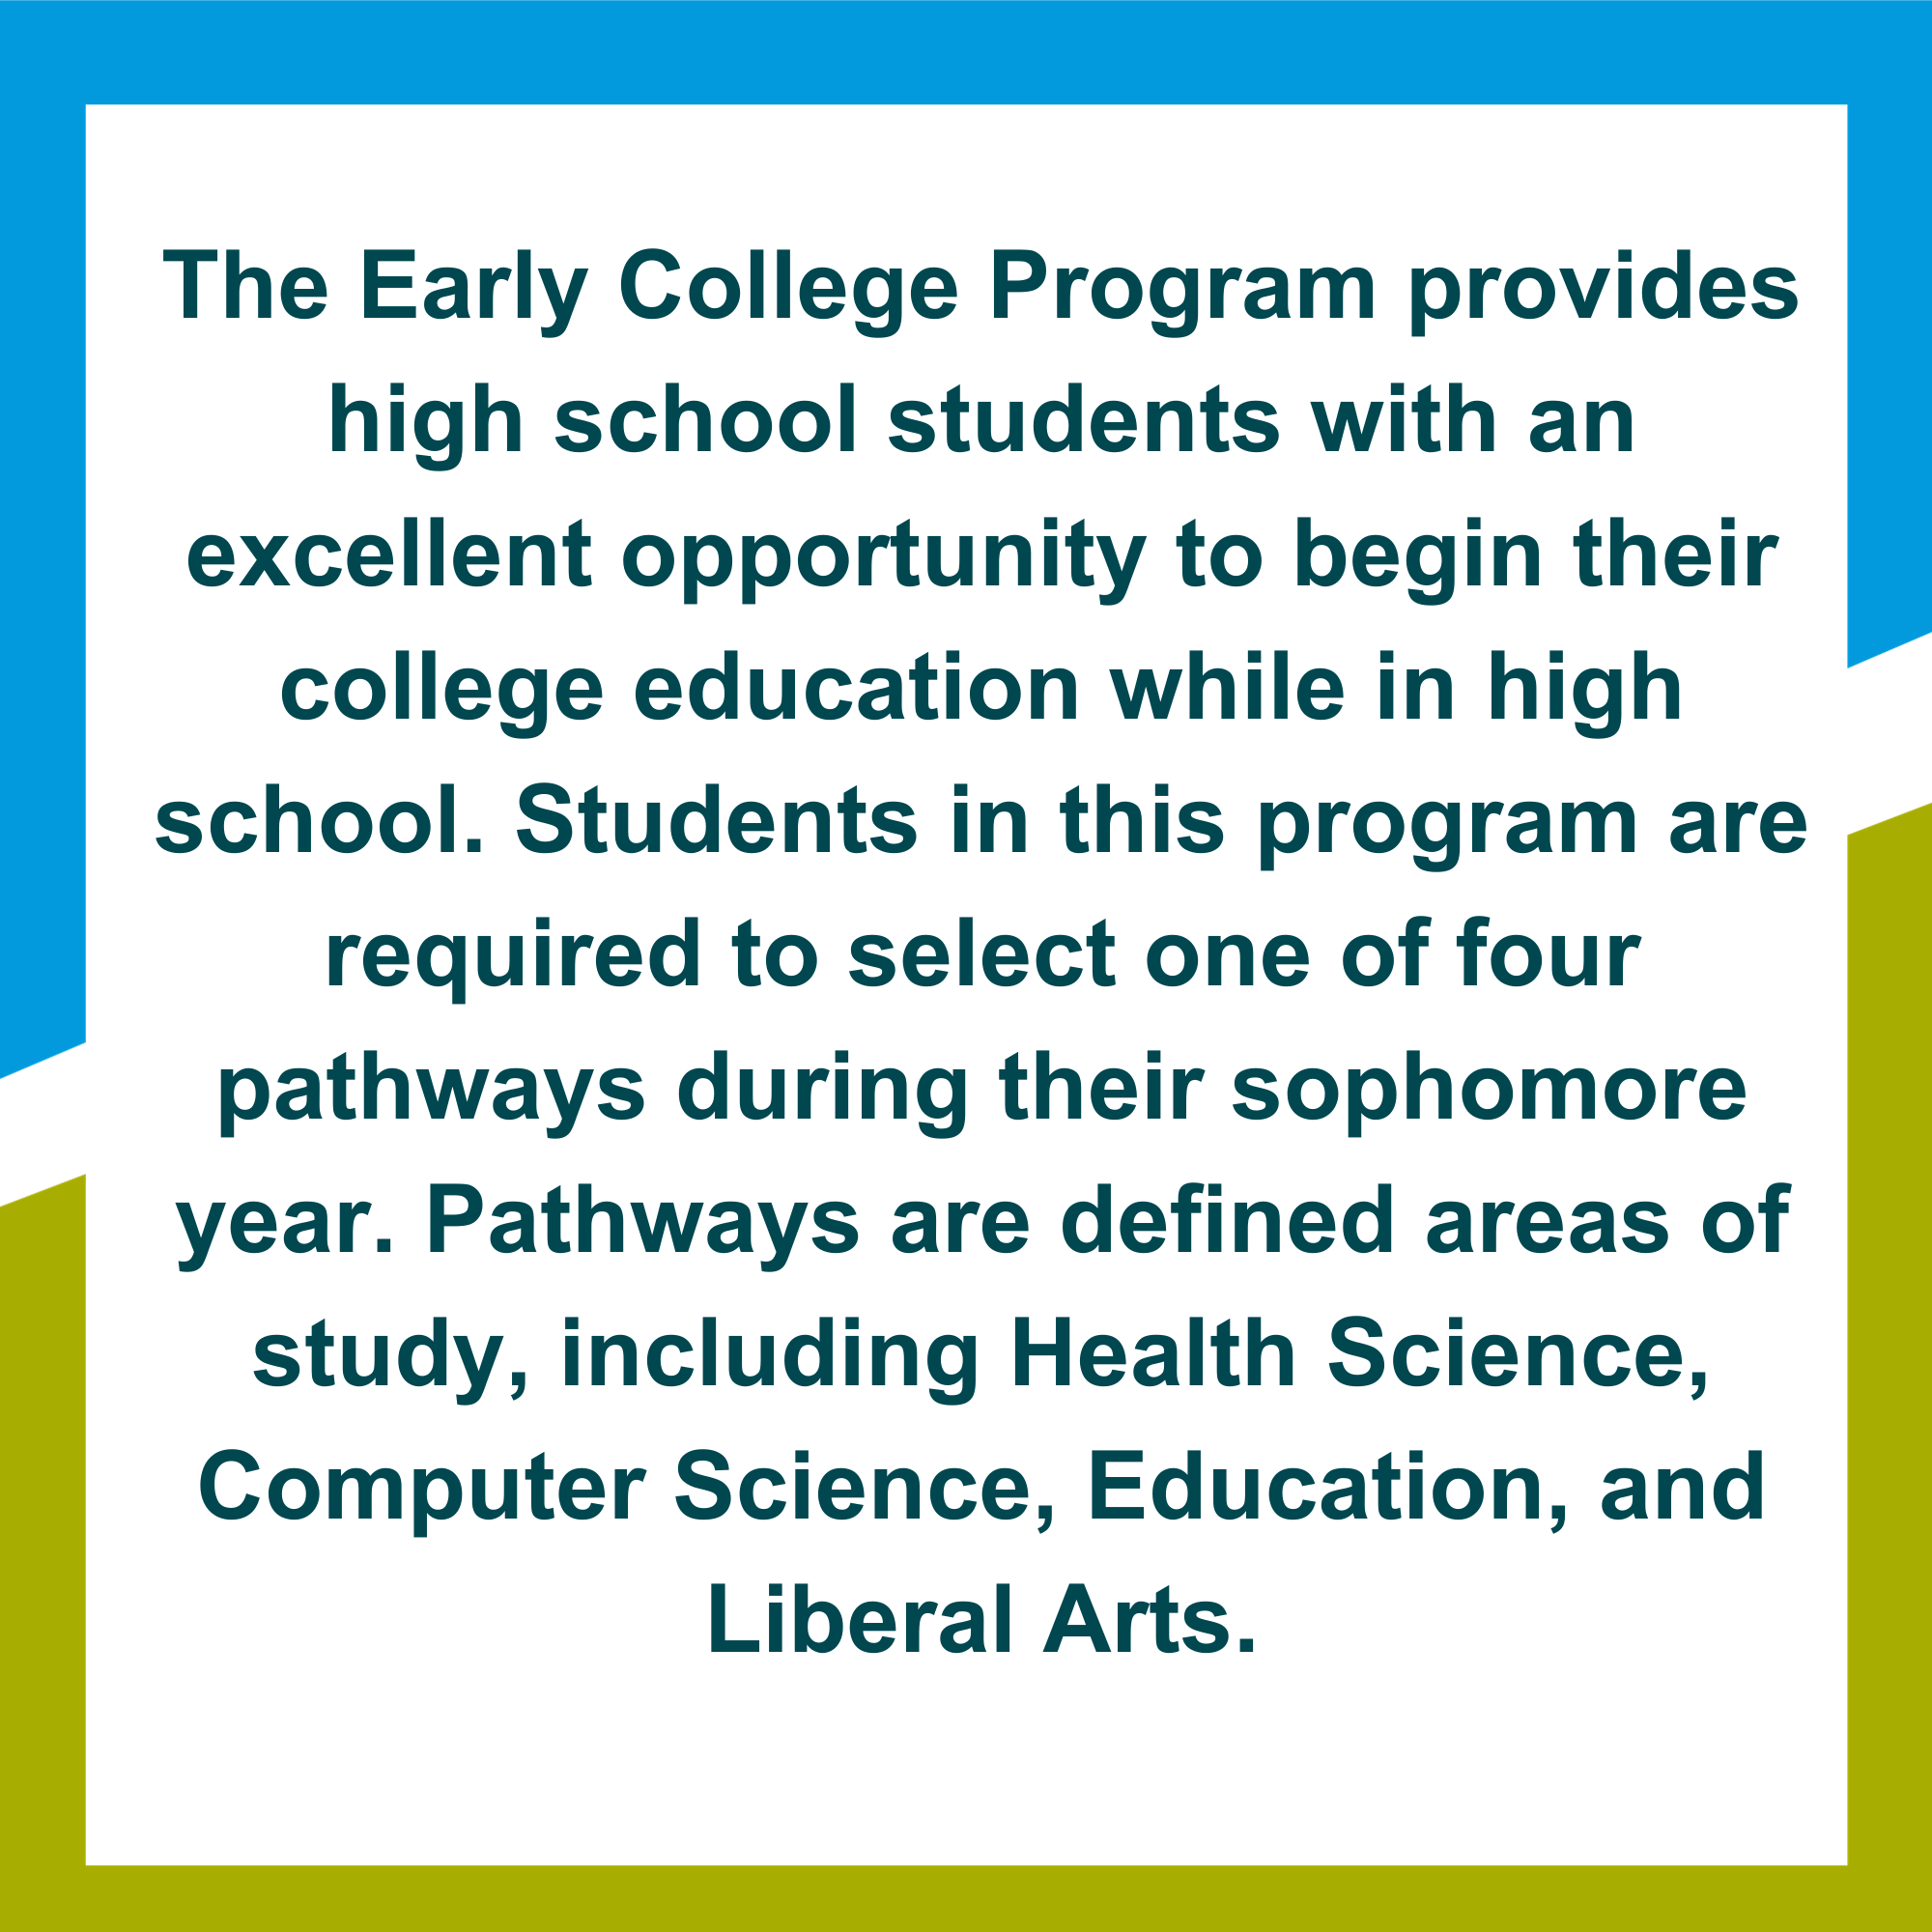 The Early College program provides high school students with an excellent opportunity to begin their college education while in high school. Students in this program are required to select one of four pathways during their sophomore year. Pathways are defined areas of study, including Health Science, Computer Science, Education, and Liberal Arts.